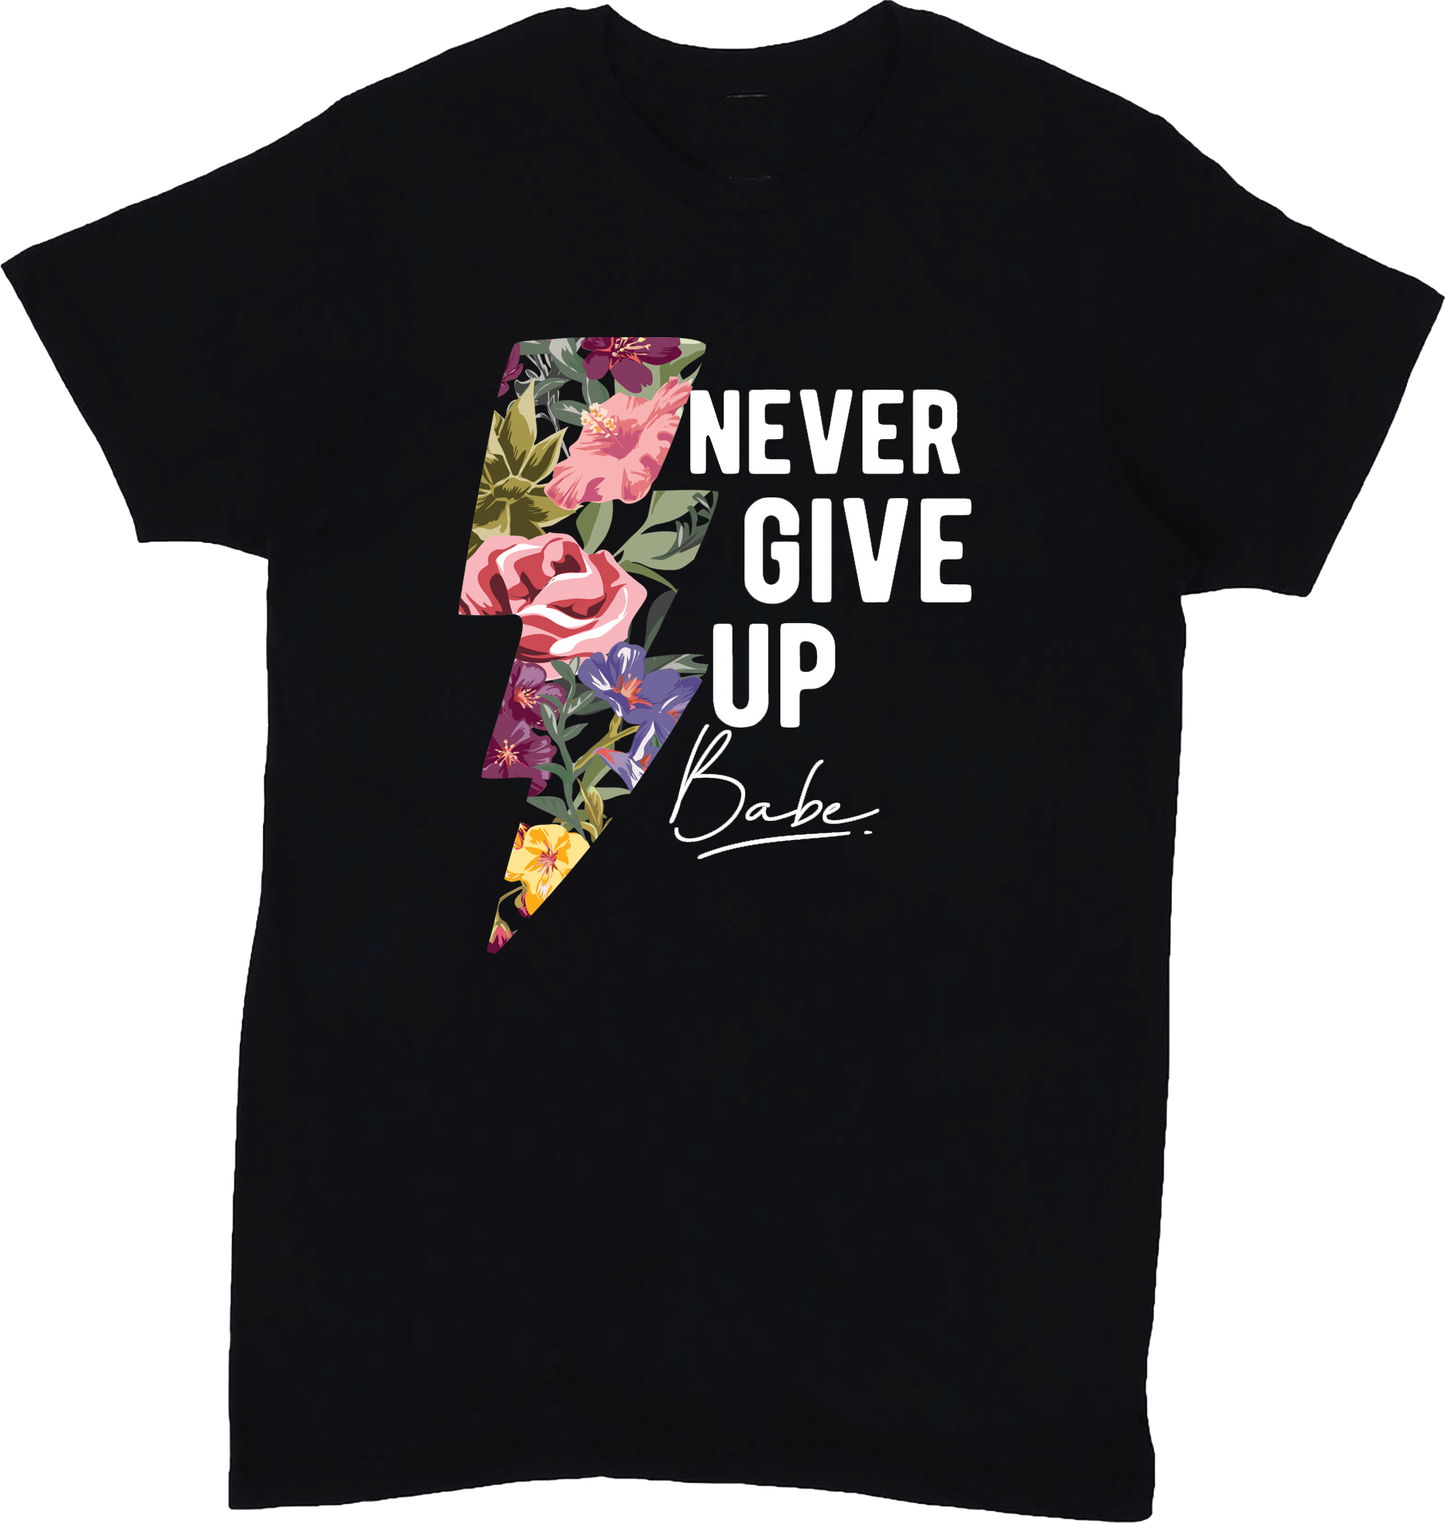 "Never Give Up" T-Shirt